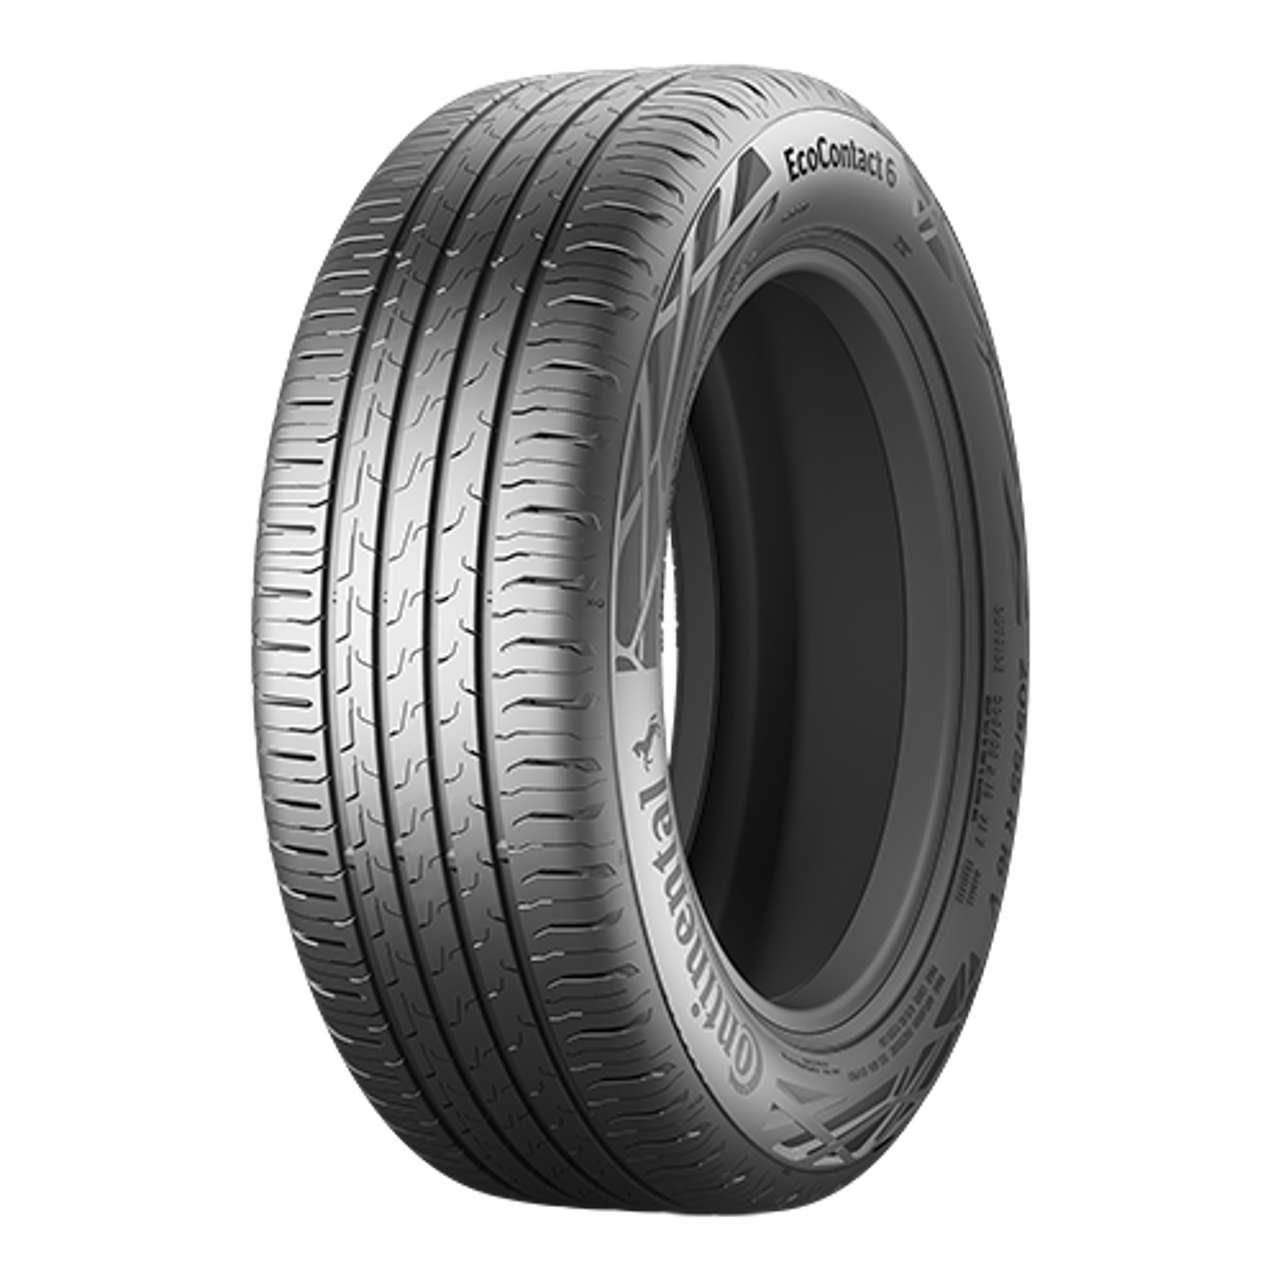 CONTINENTAL ECOCONTACT 6 (EVc) 195/55R16 91V